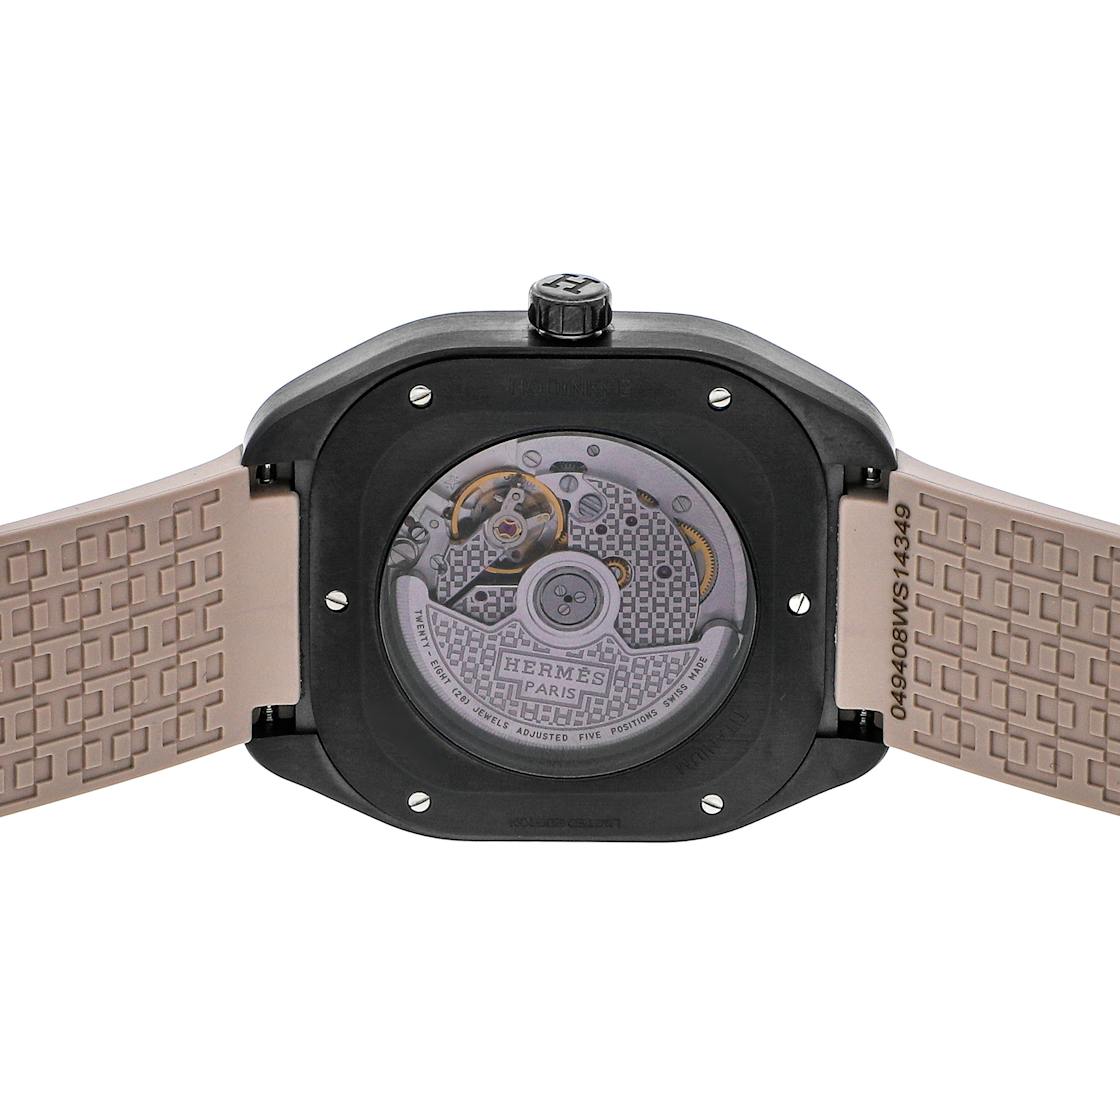 HODINKEE and Hermès Limited Edition H08 Watch